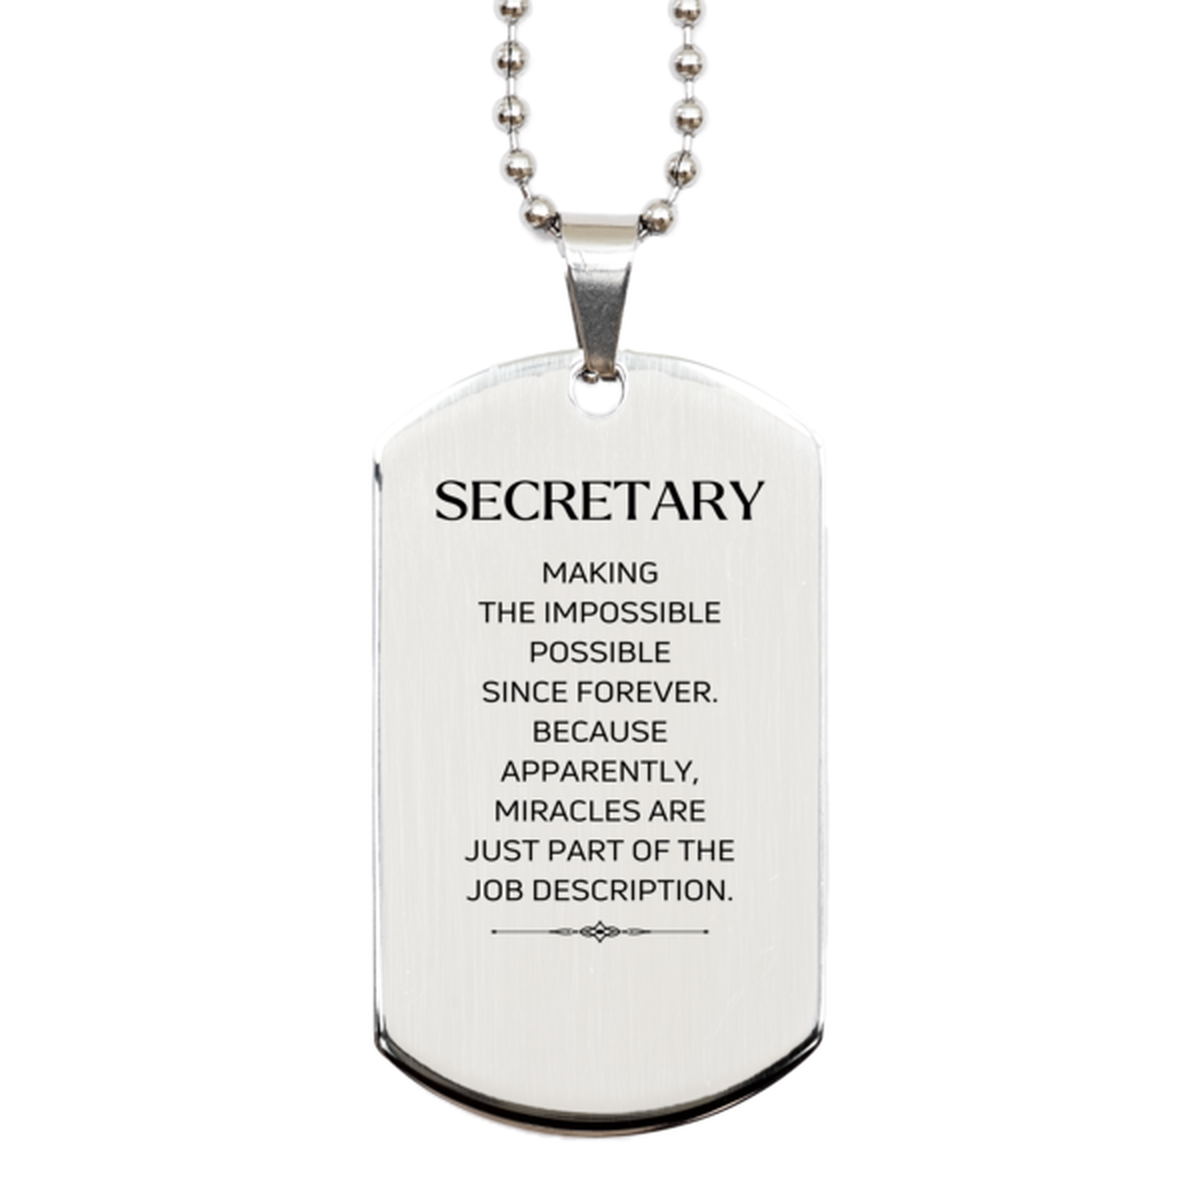 Funny Secretary Gifts, Miracles are just part of the job description, Inspirational Birthday Silver Dog Tag For Secretary, Men, Women, Coworkers, Friends, Boss